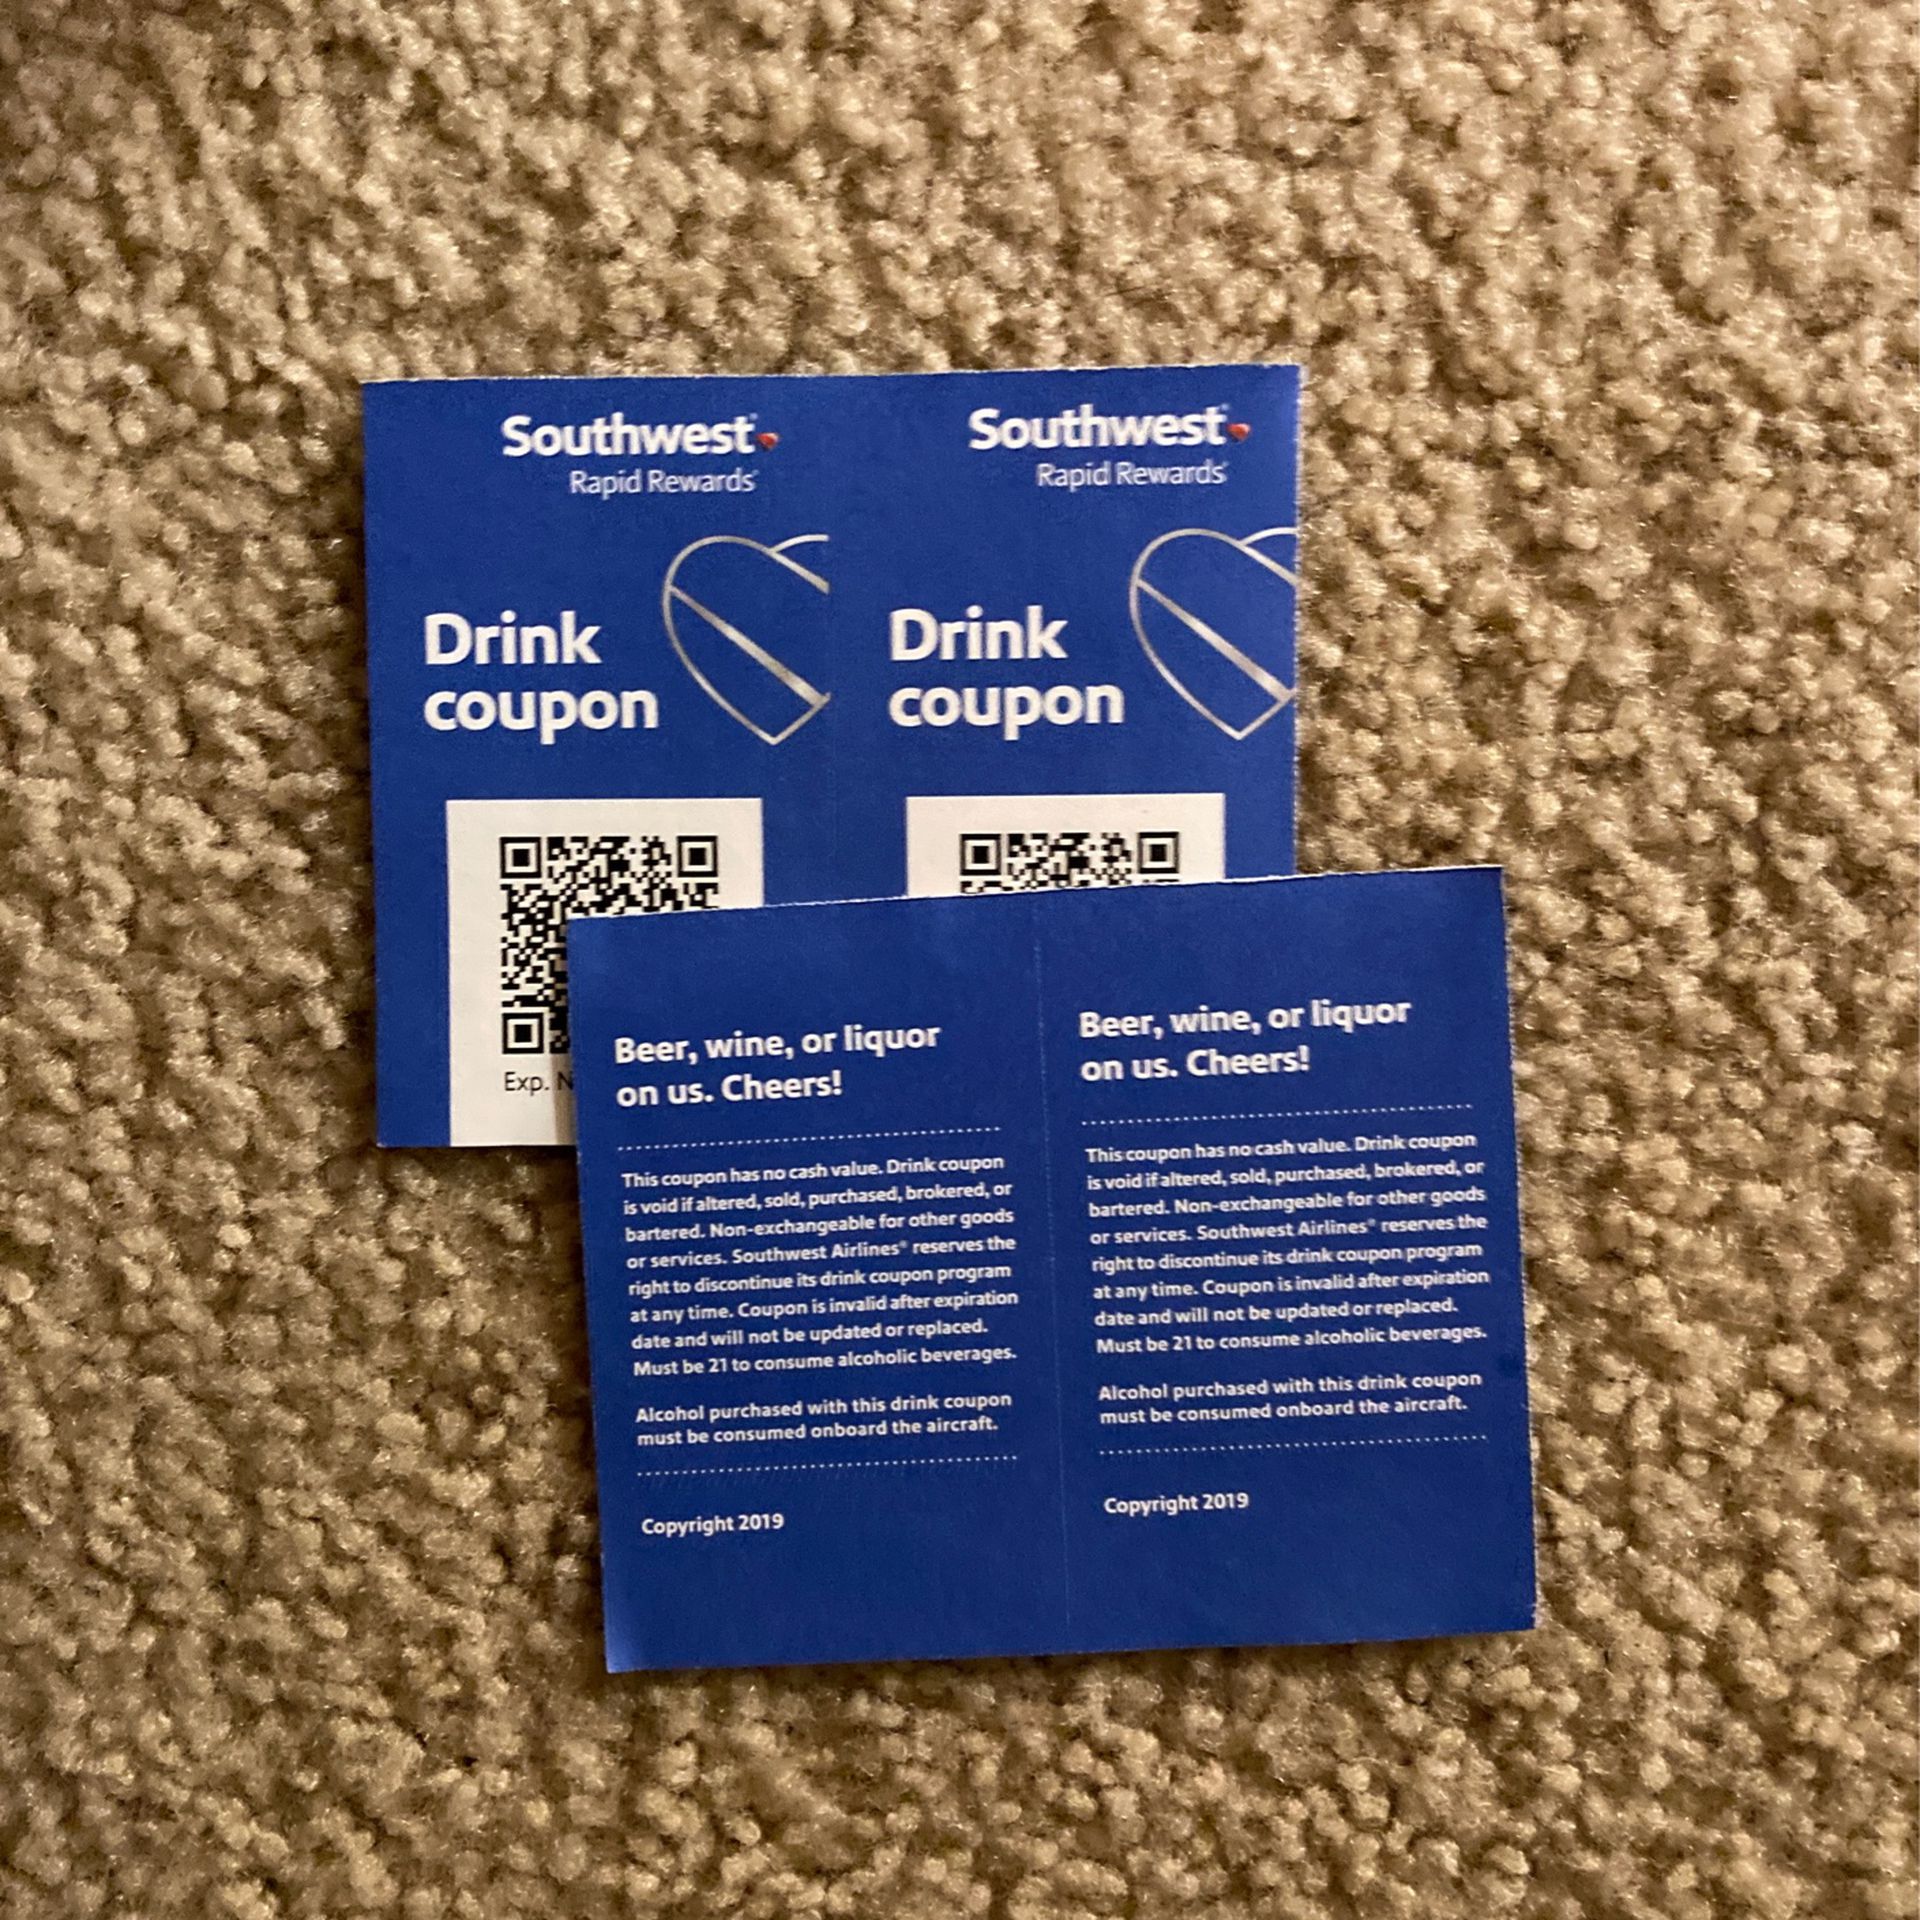 4 Southwest Drink Coupons Exp 11/30/20 (Free)